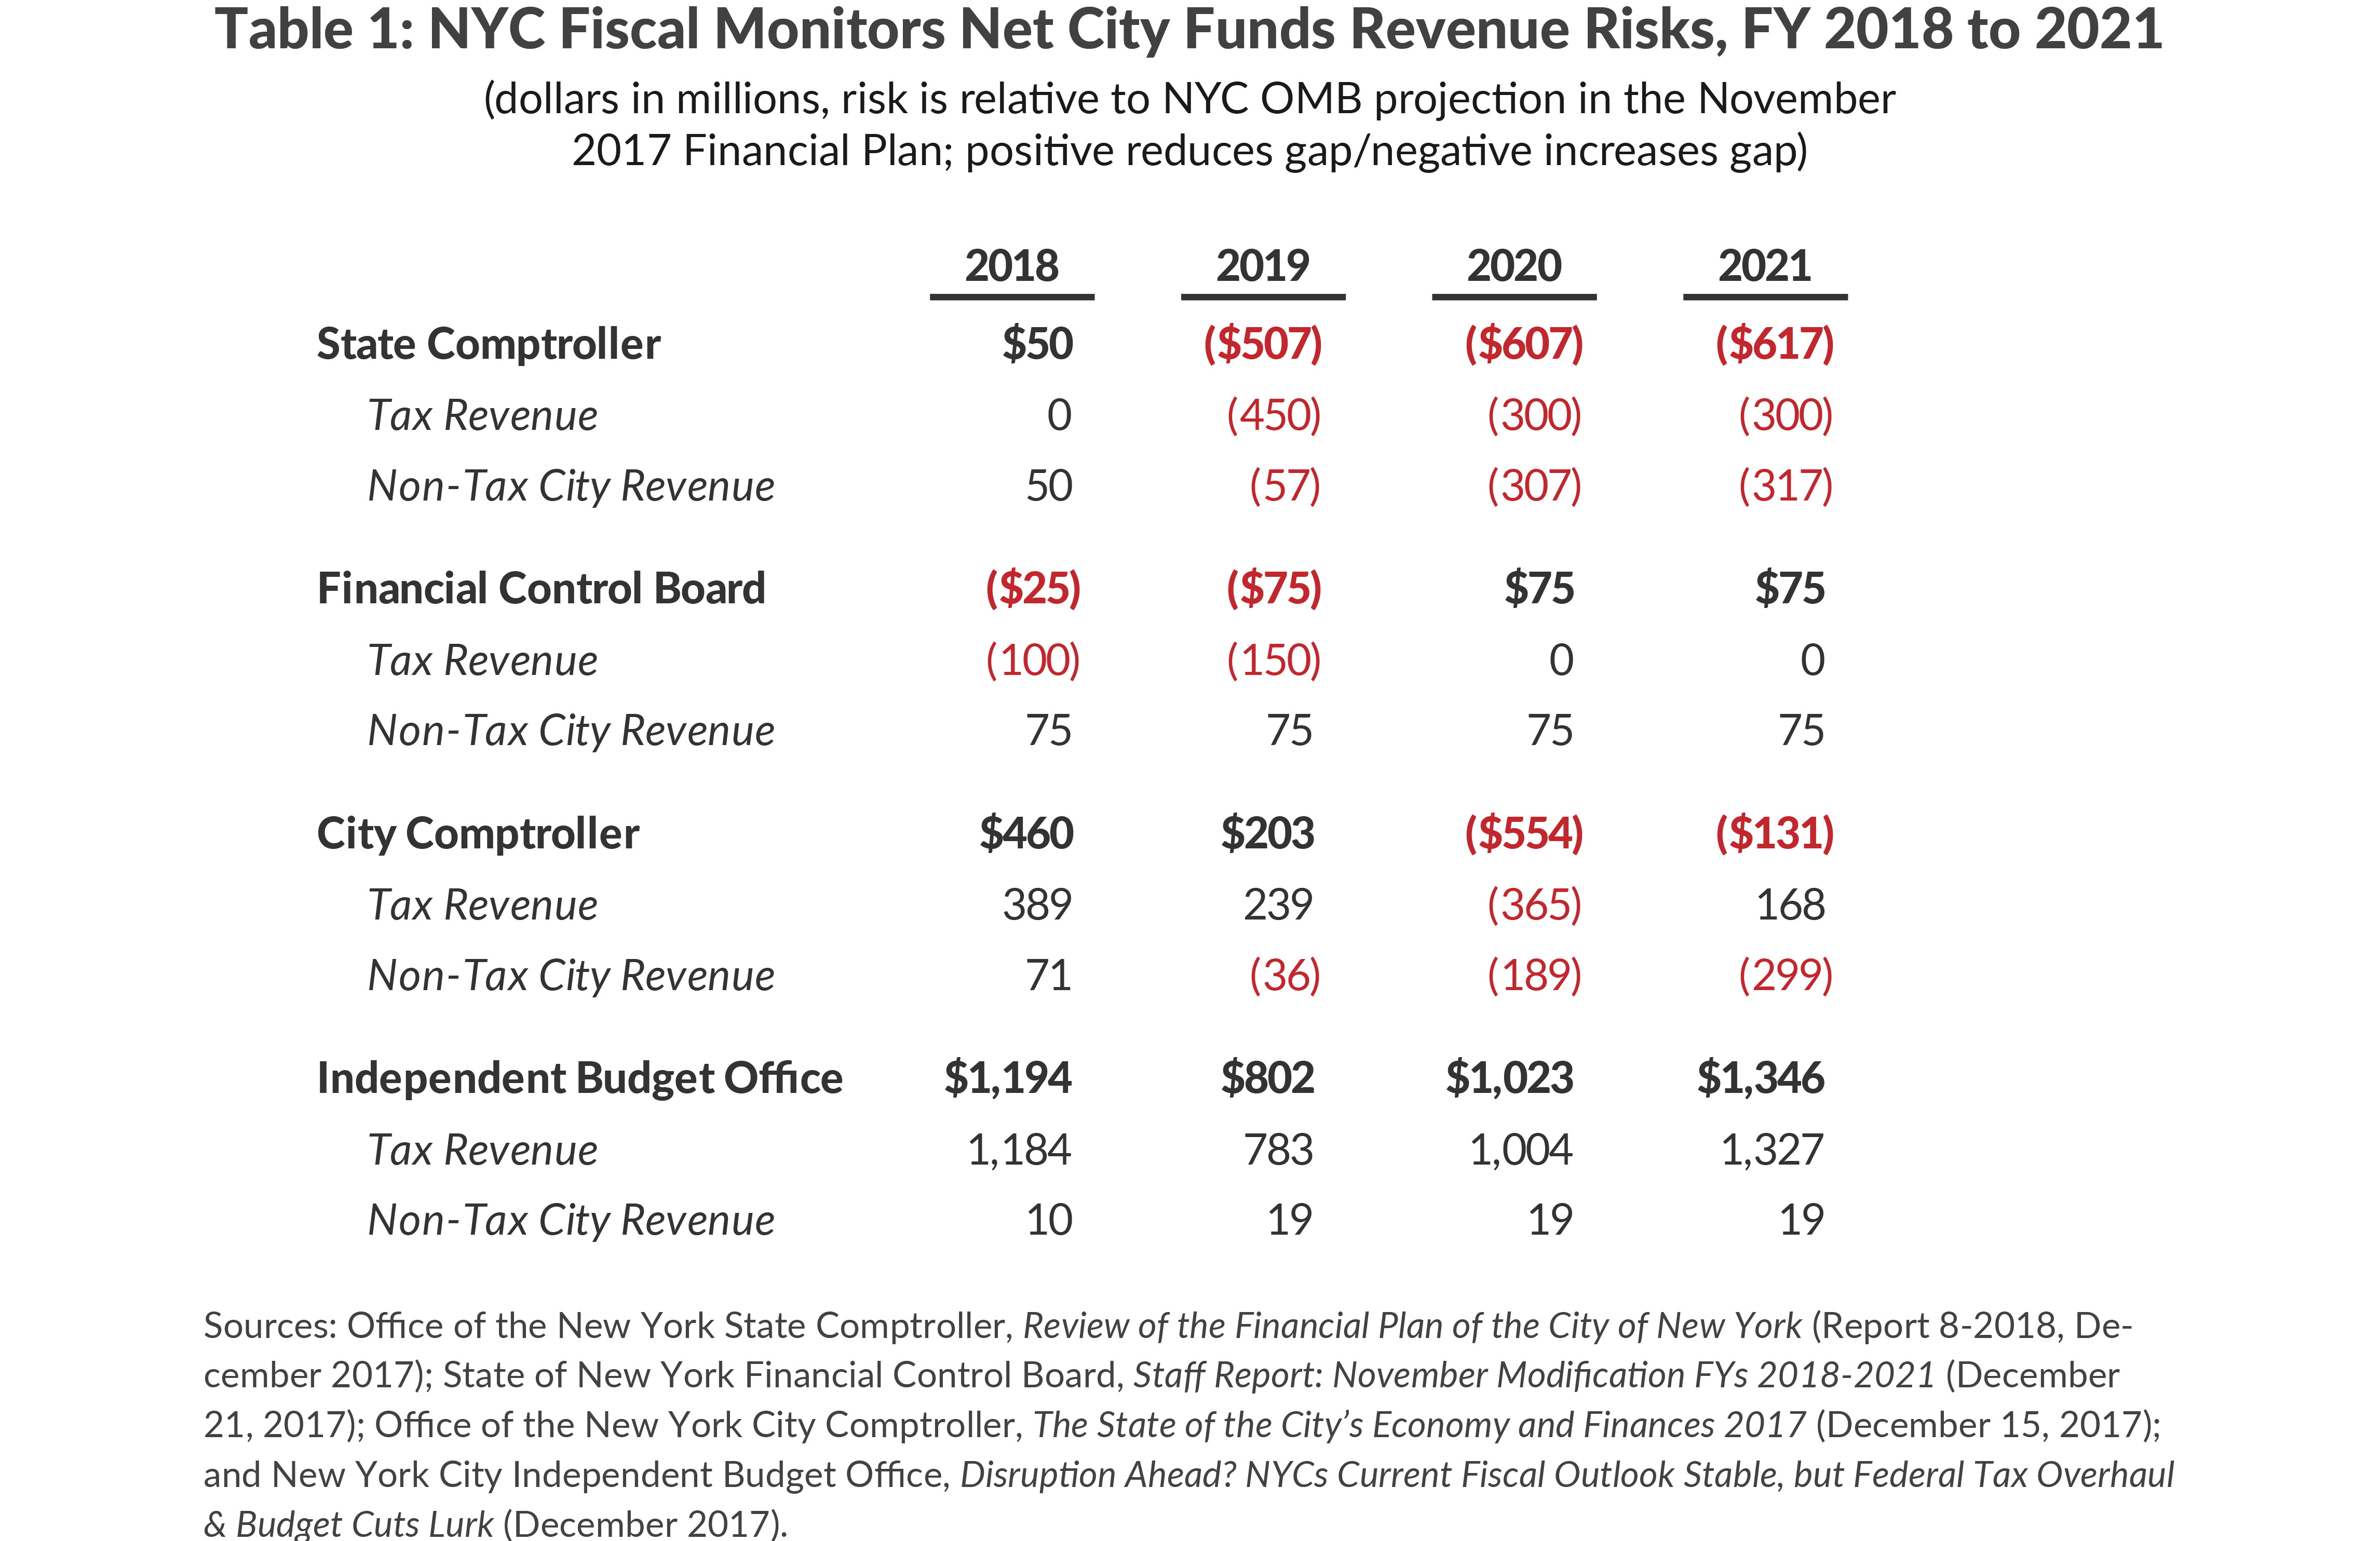 Table 1: NYC Fiscal Monitors Net City Funds Revenue Risks, FY 2018 to 2021